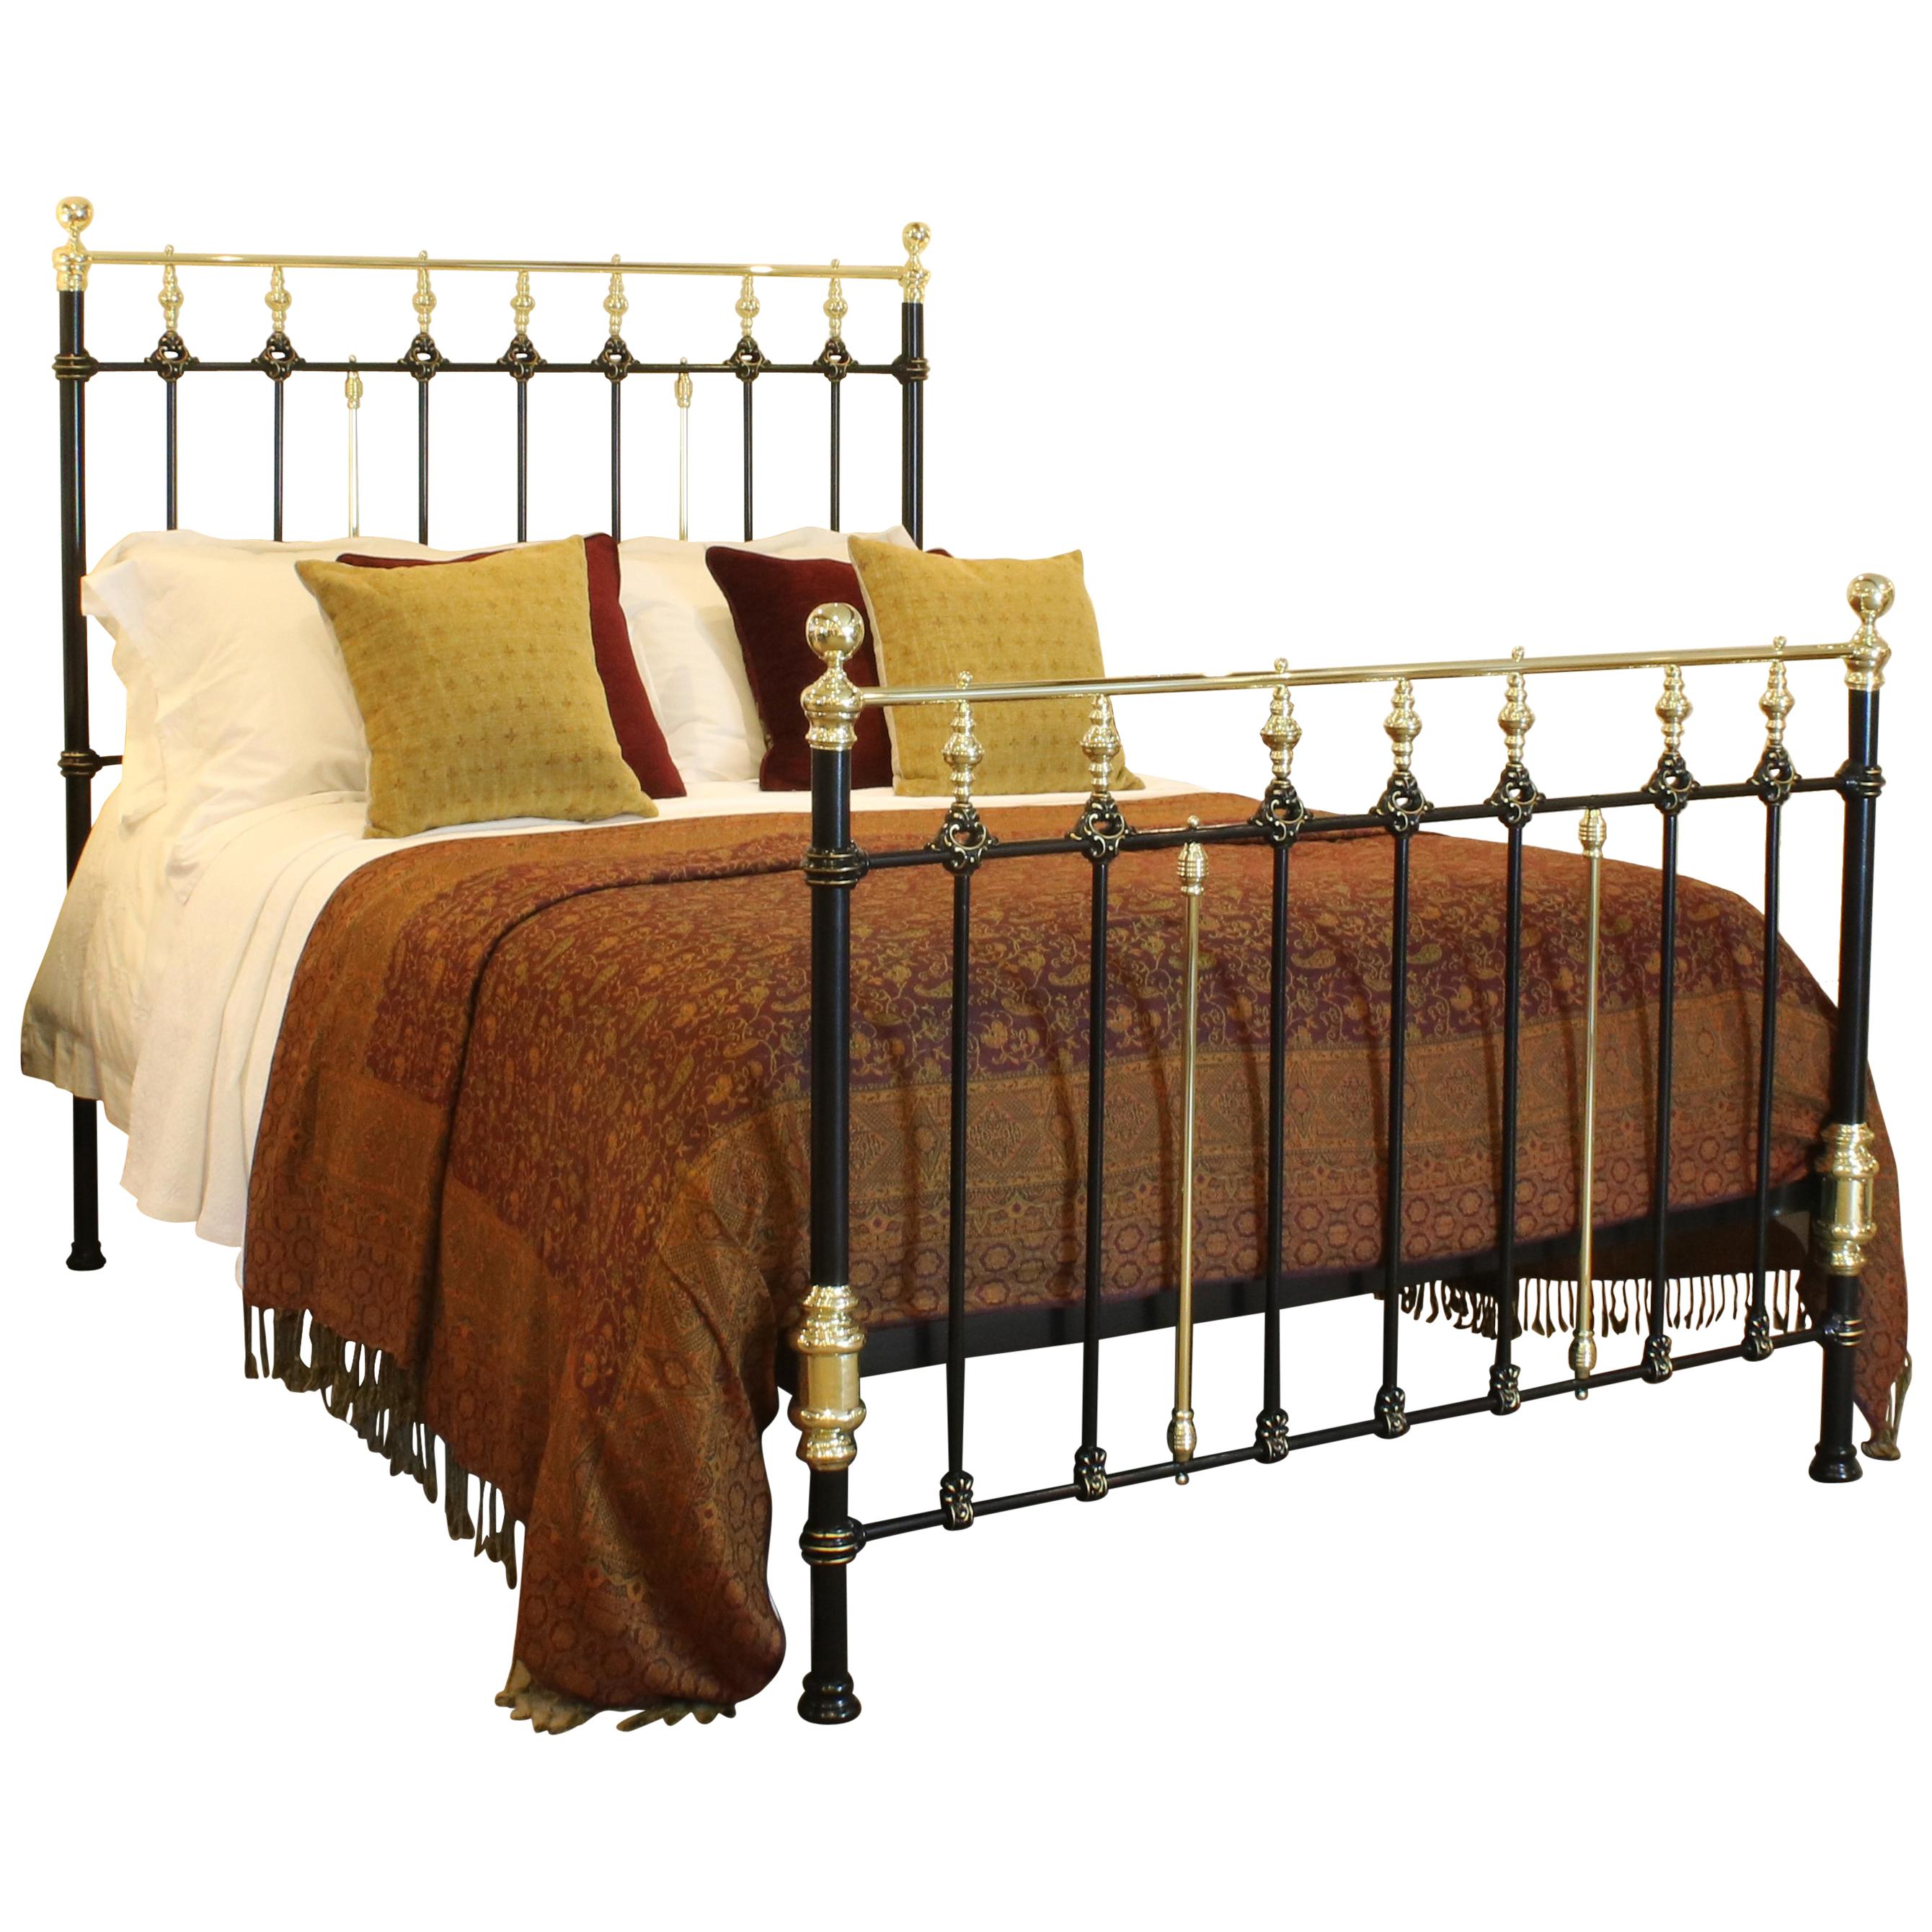 Decorative Brass and Iron Bed in Black, MK164